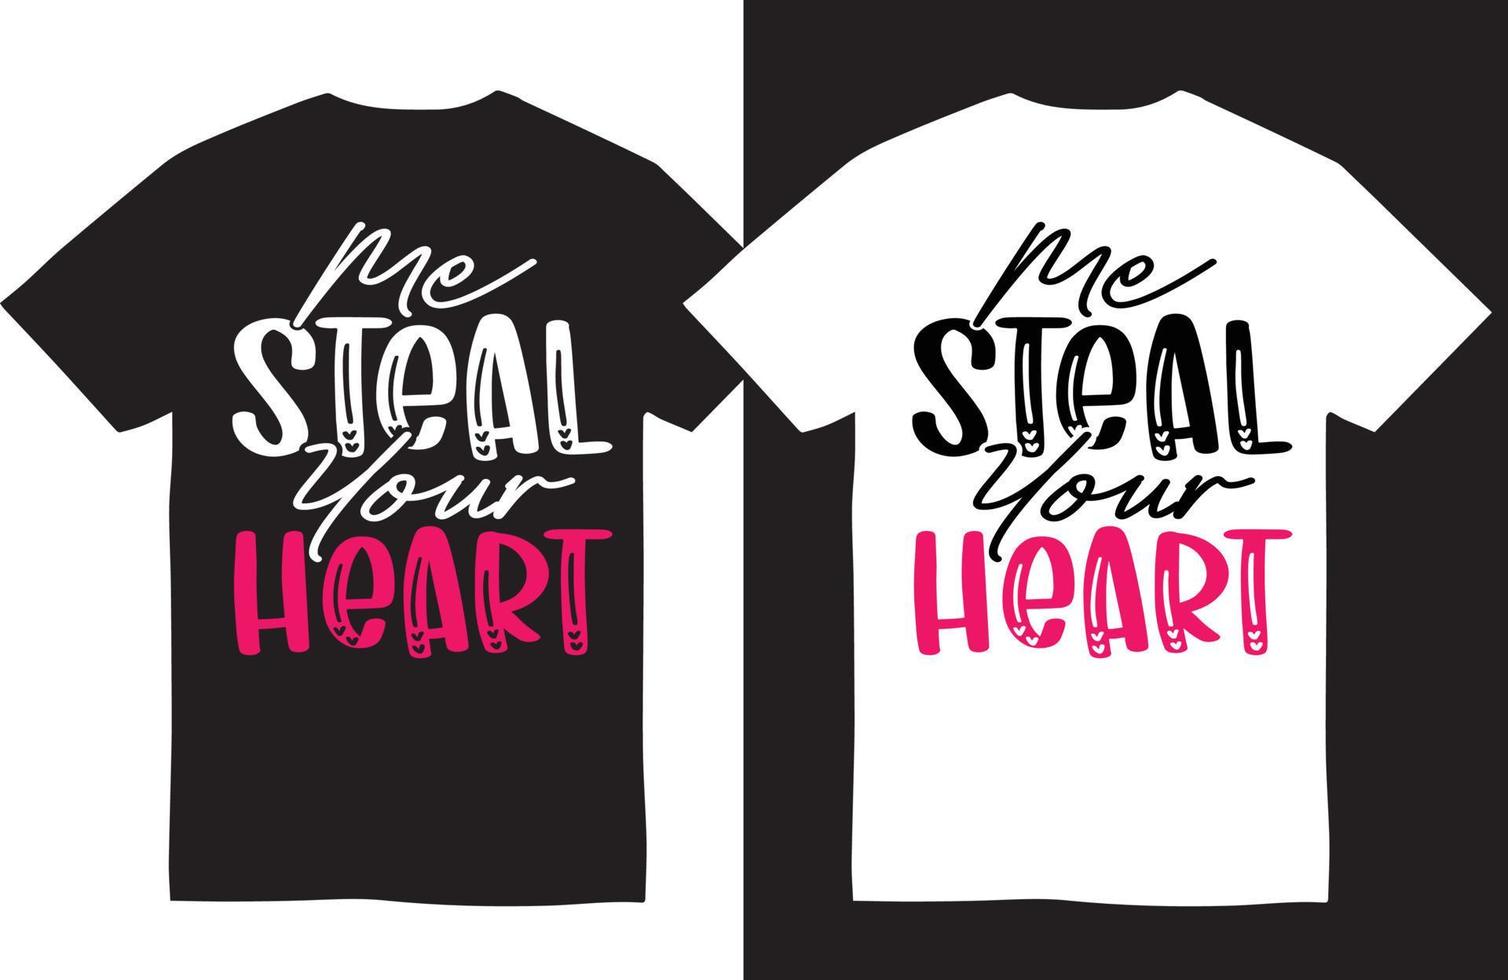 Valentine day t-shirt design.me steal your heart vector